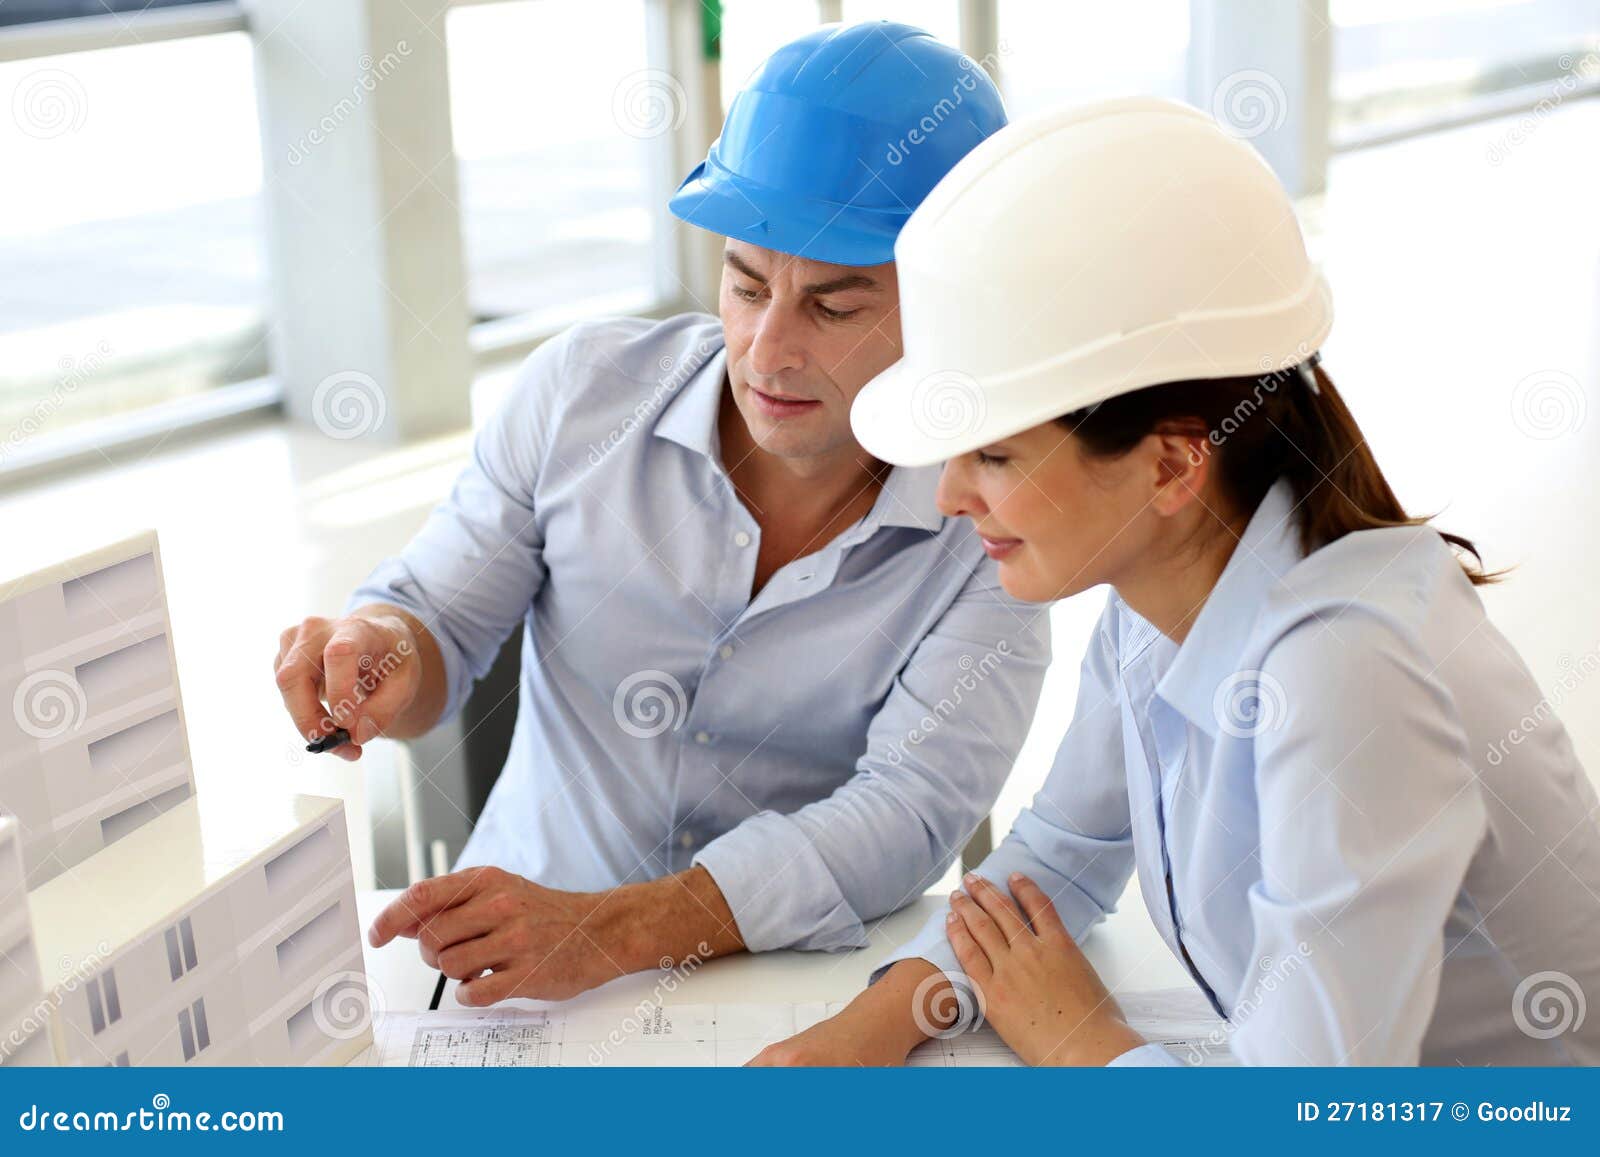 Architects At Work Royalty Free Stock Photography - Image: 27181317